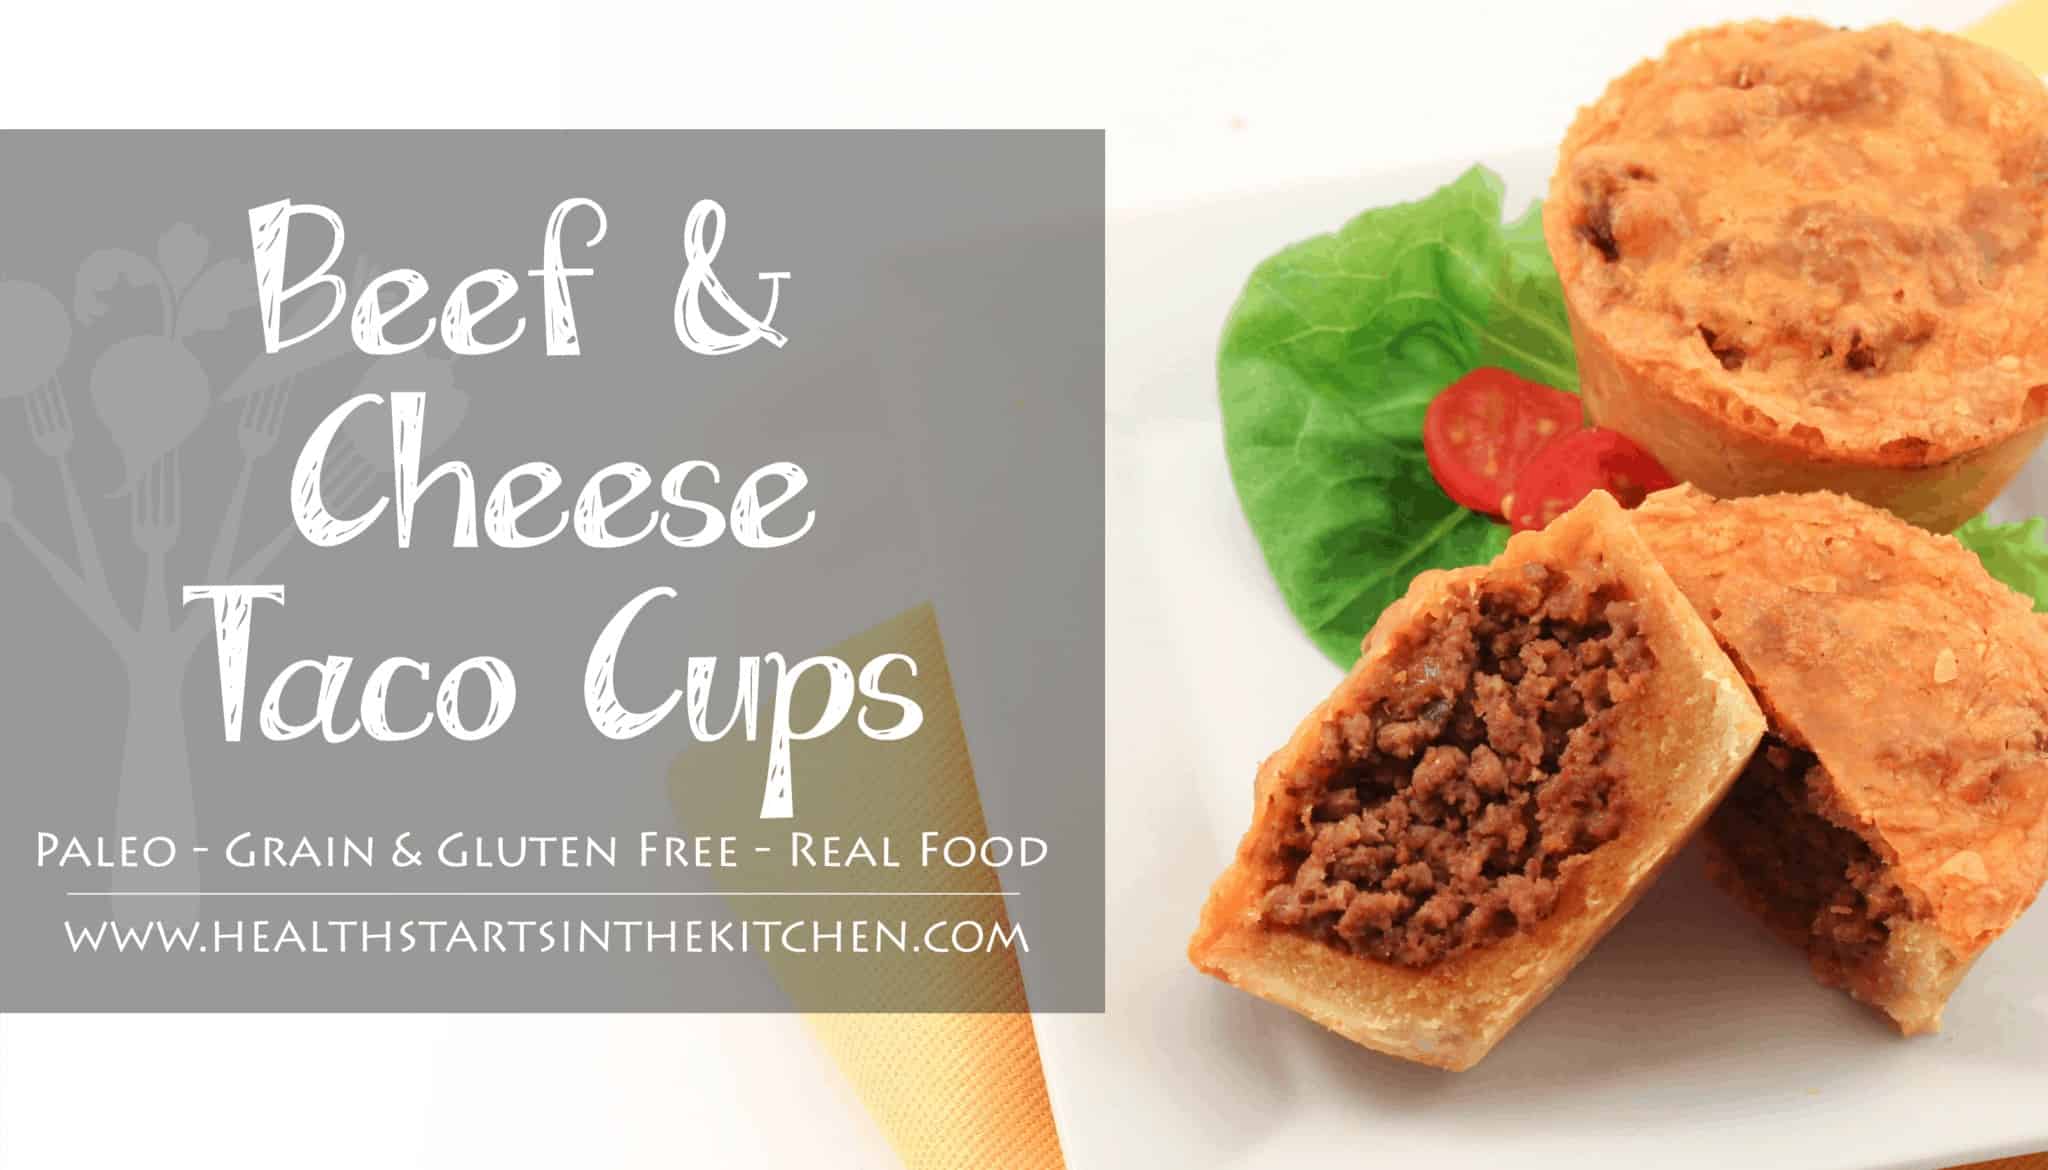 Beef & Cheese Taco Cups